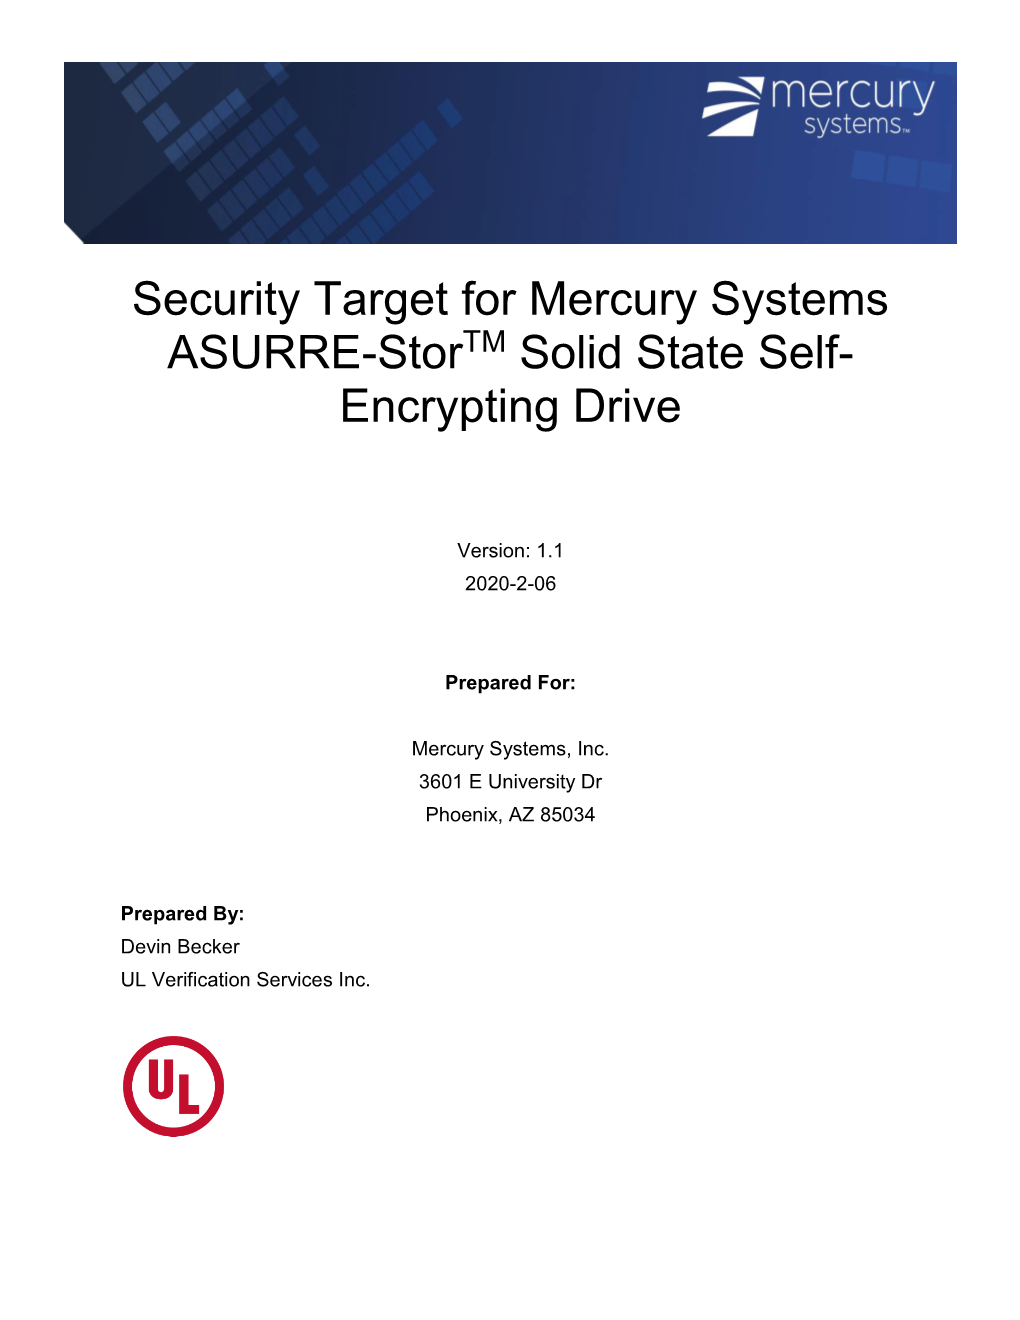 Security Target for Mercury Systems ASURRE-Stor Solid State Self